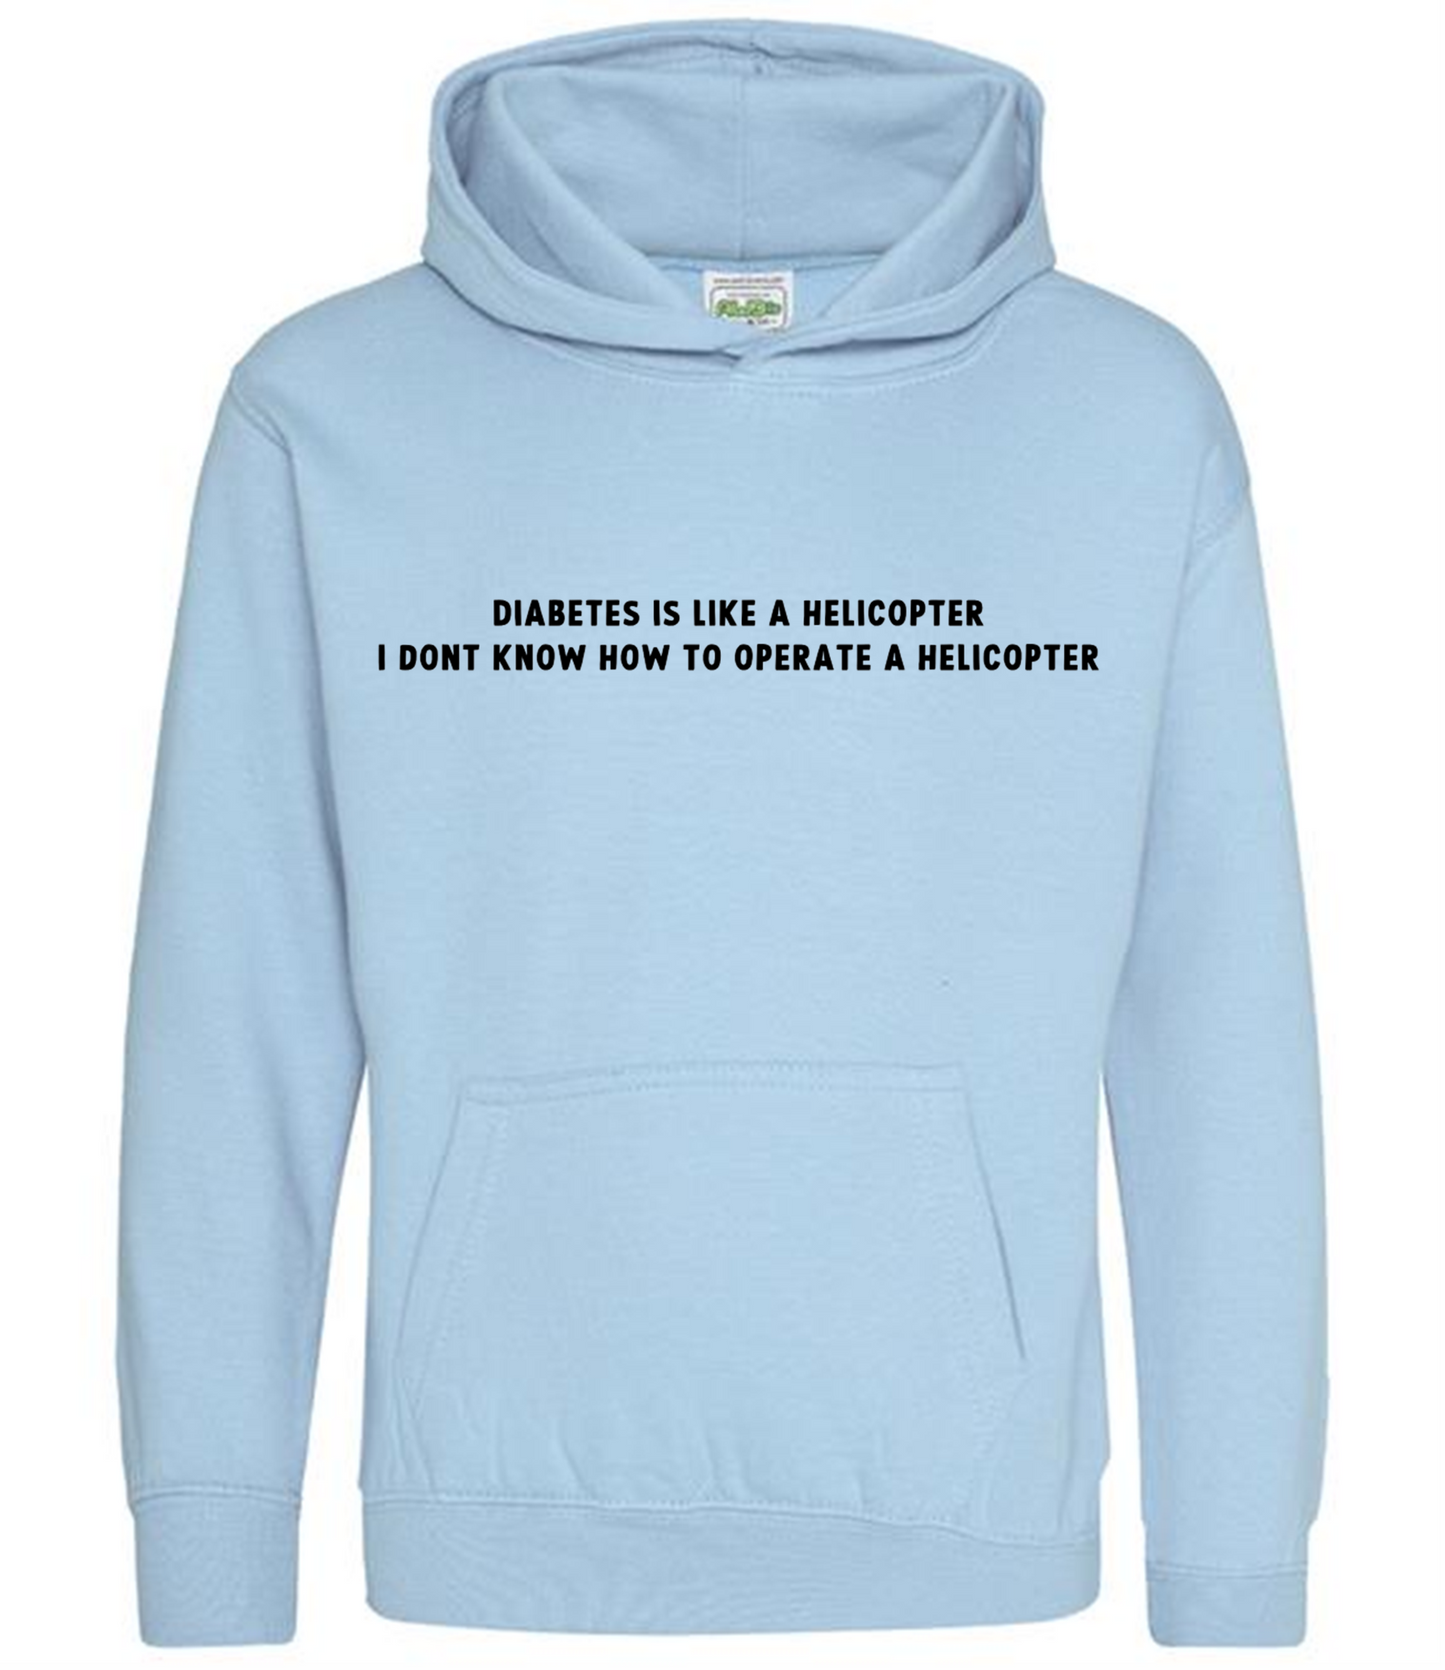 Diabetes Is Like A Helicopter, I Dont Know How To Operate A Helicopter Kids Hoodie